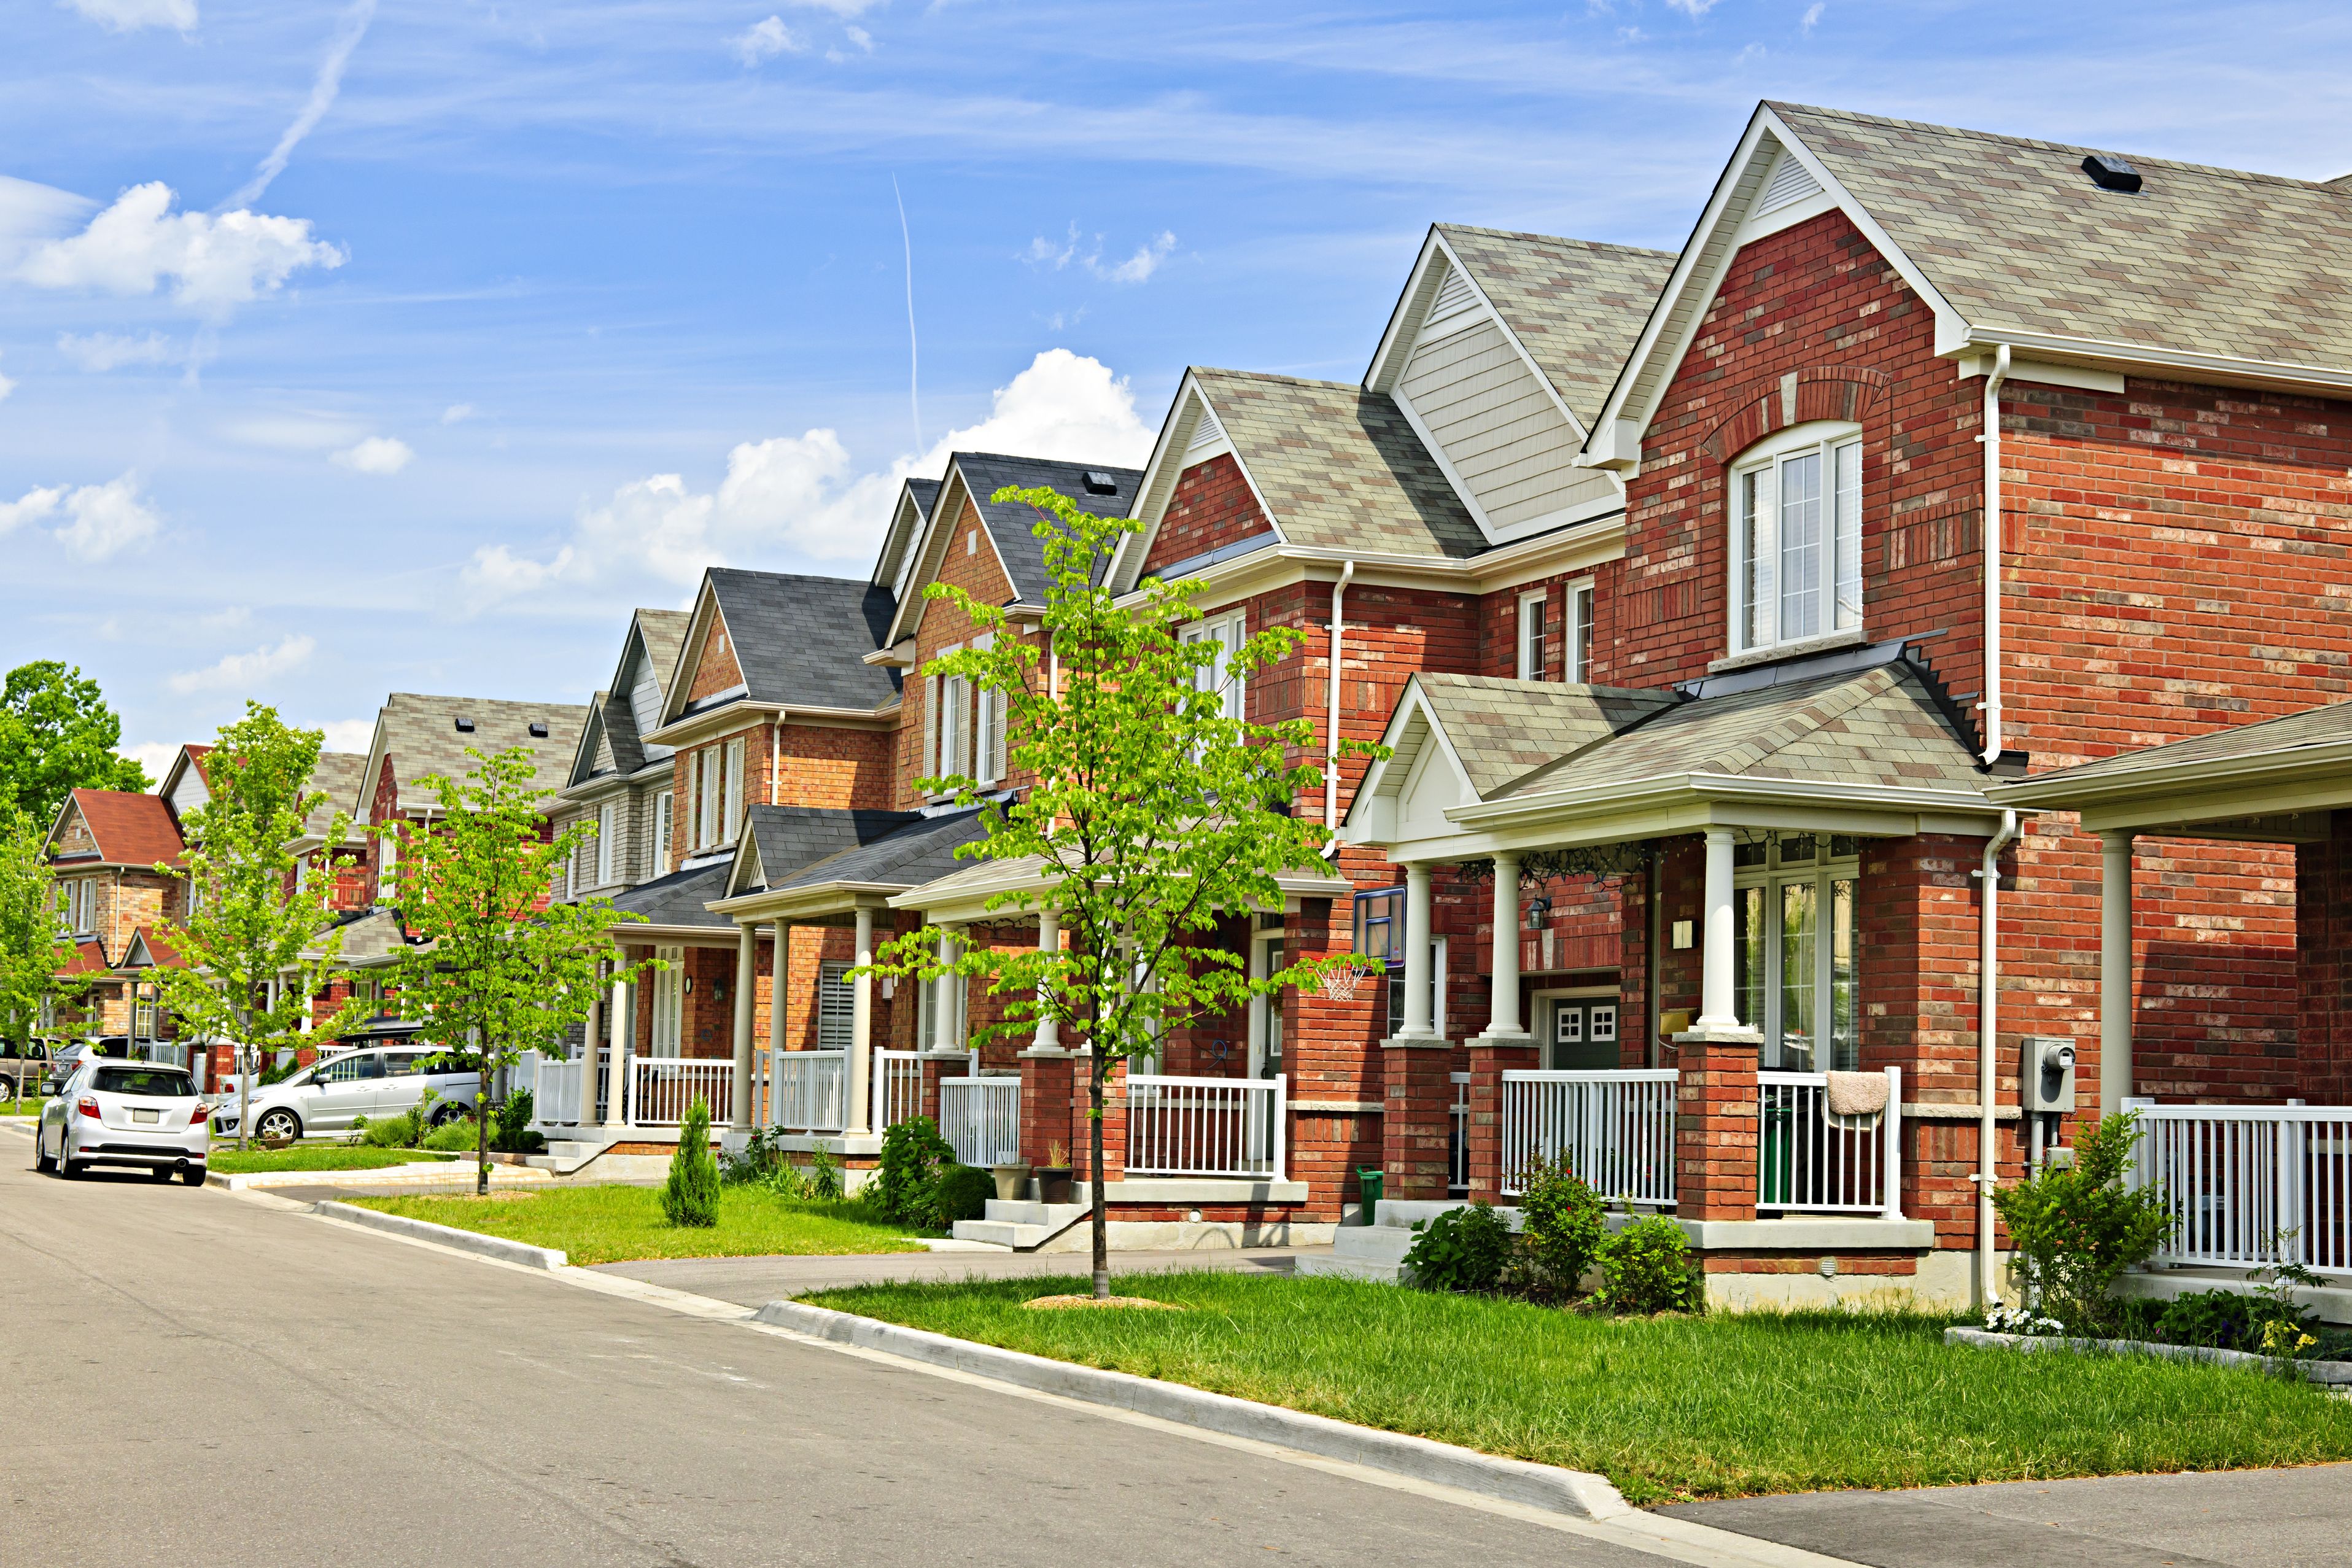 Knowing What To Look For In Your Future Neighborhood